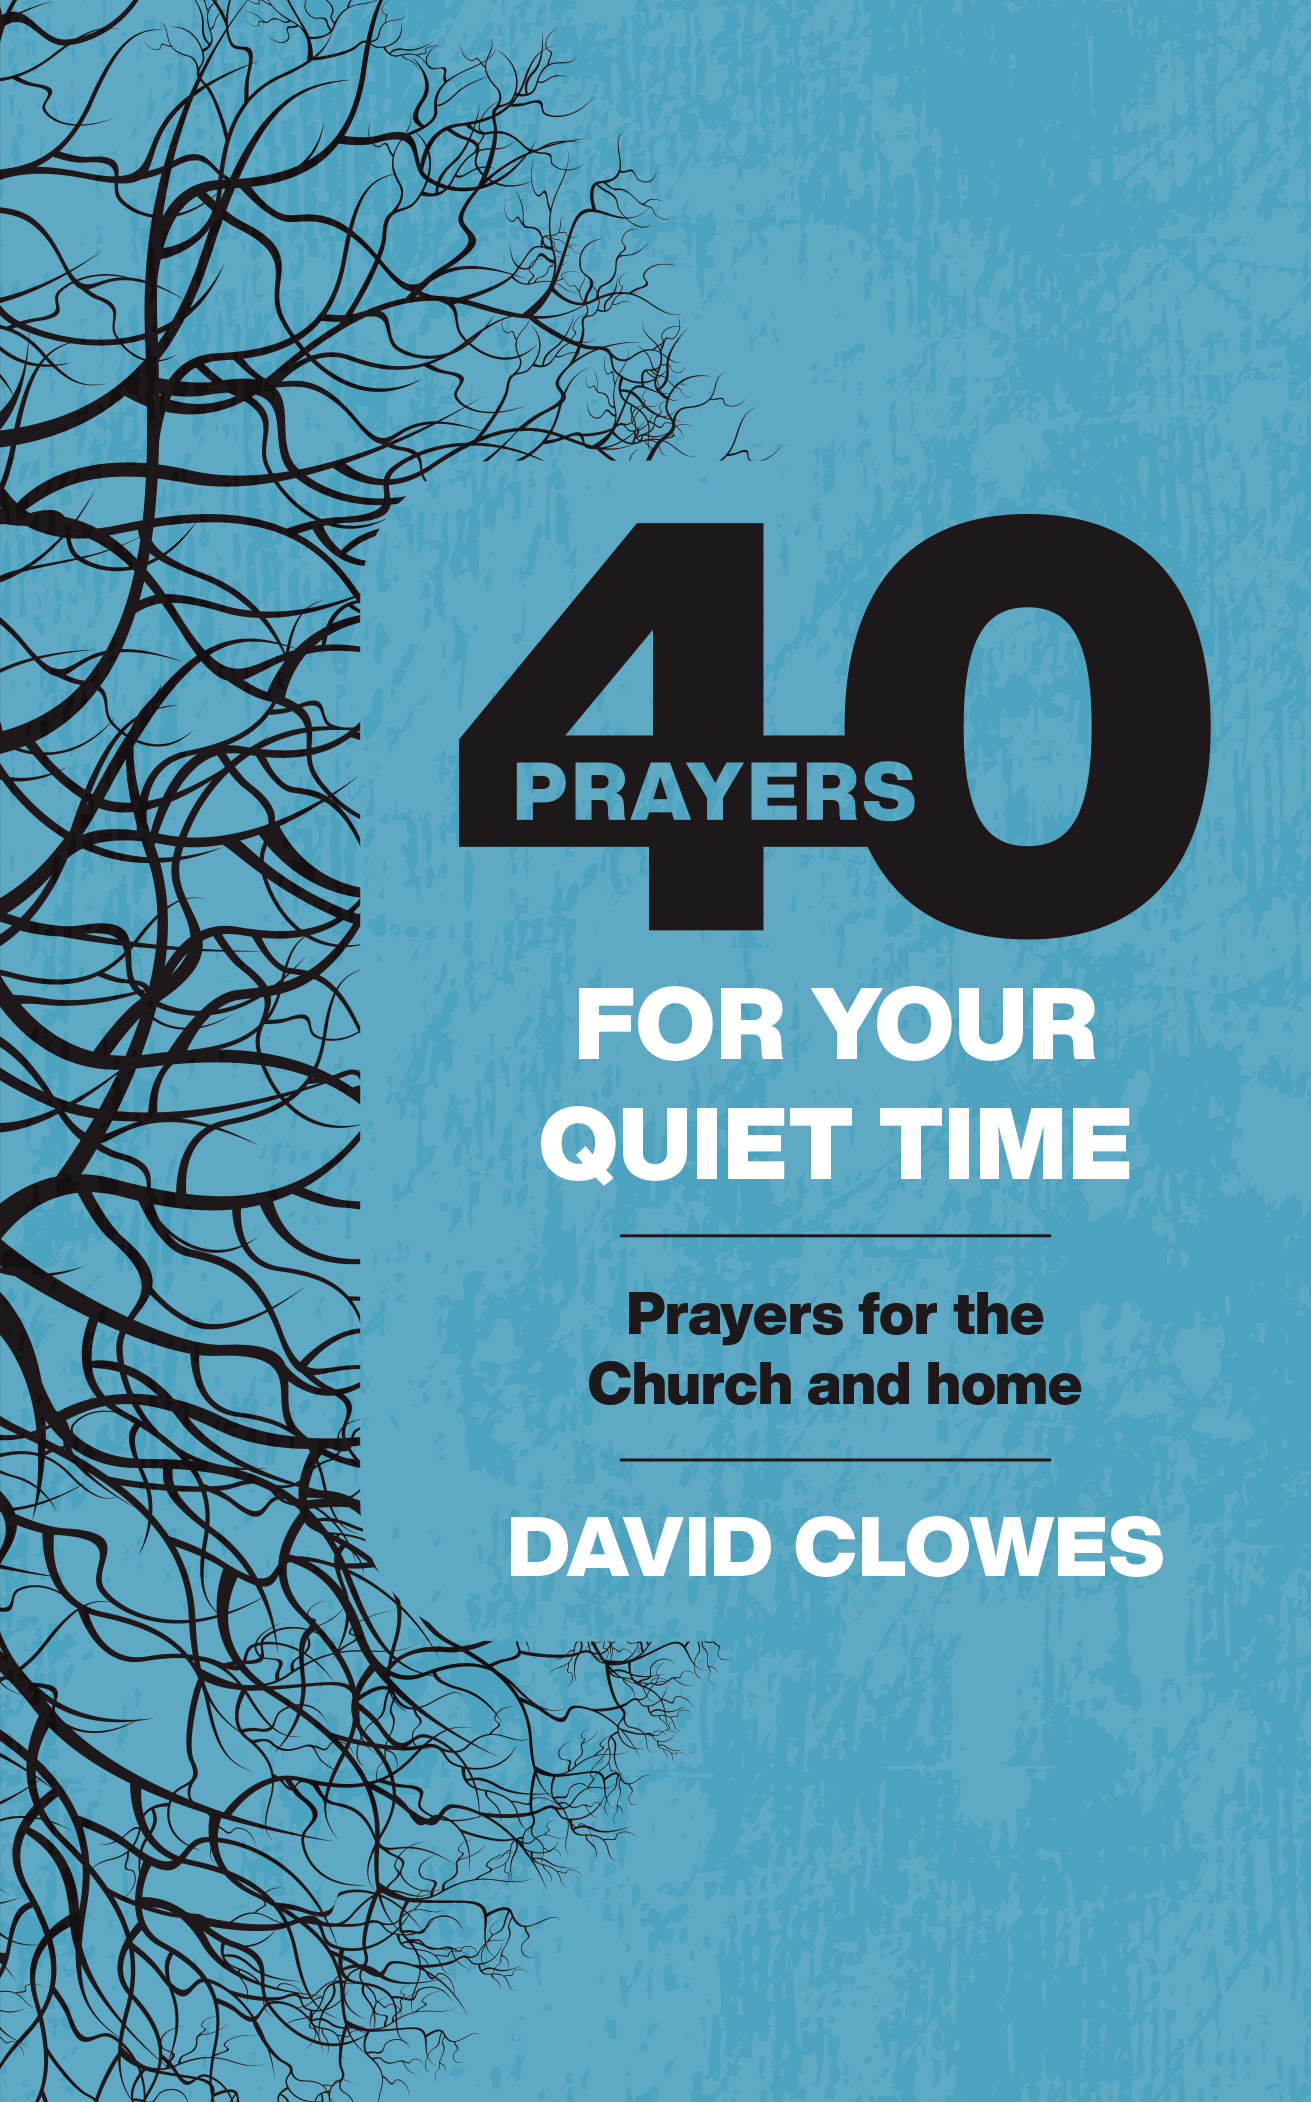 40 Prayers for Your Quiet Time